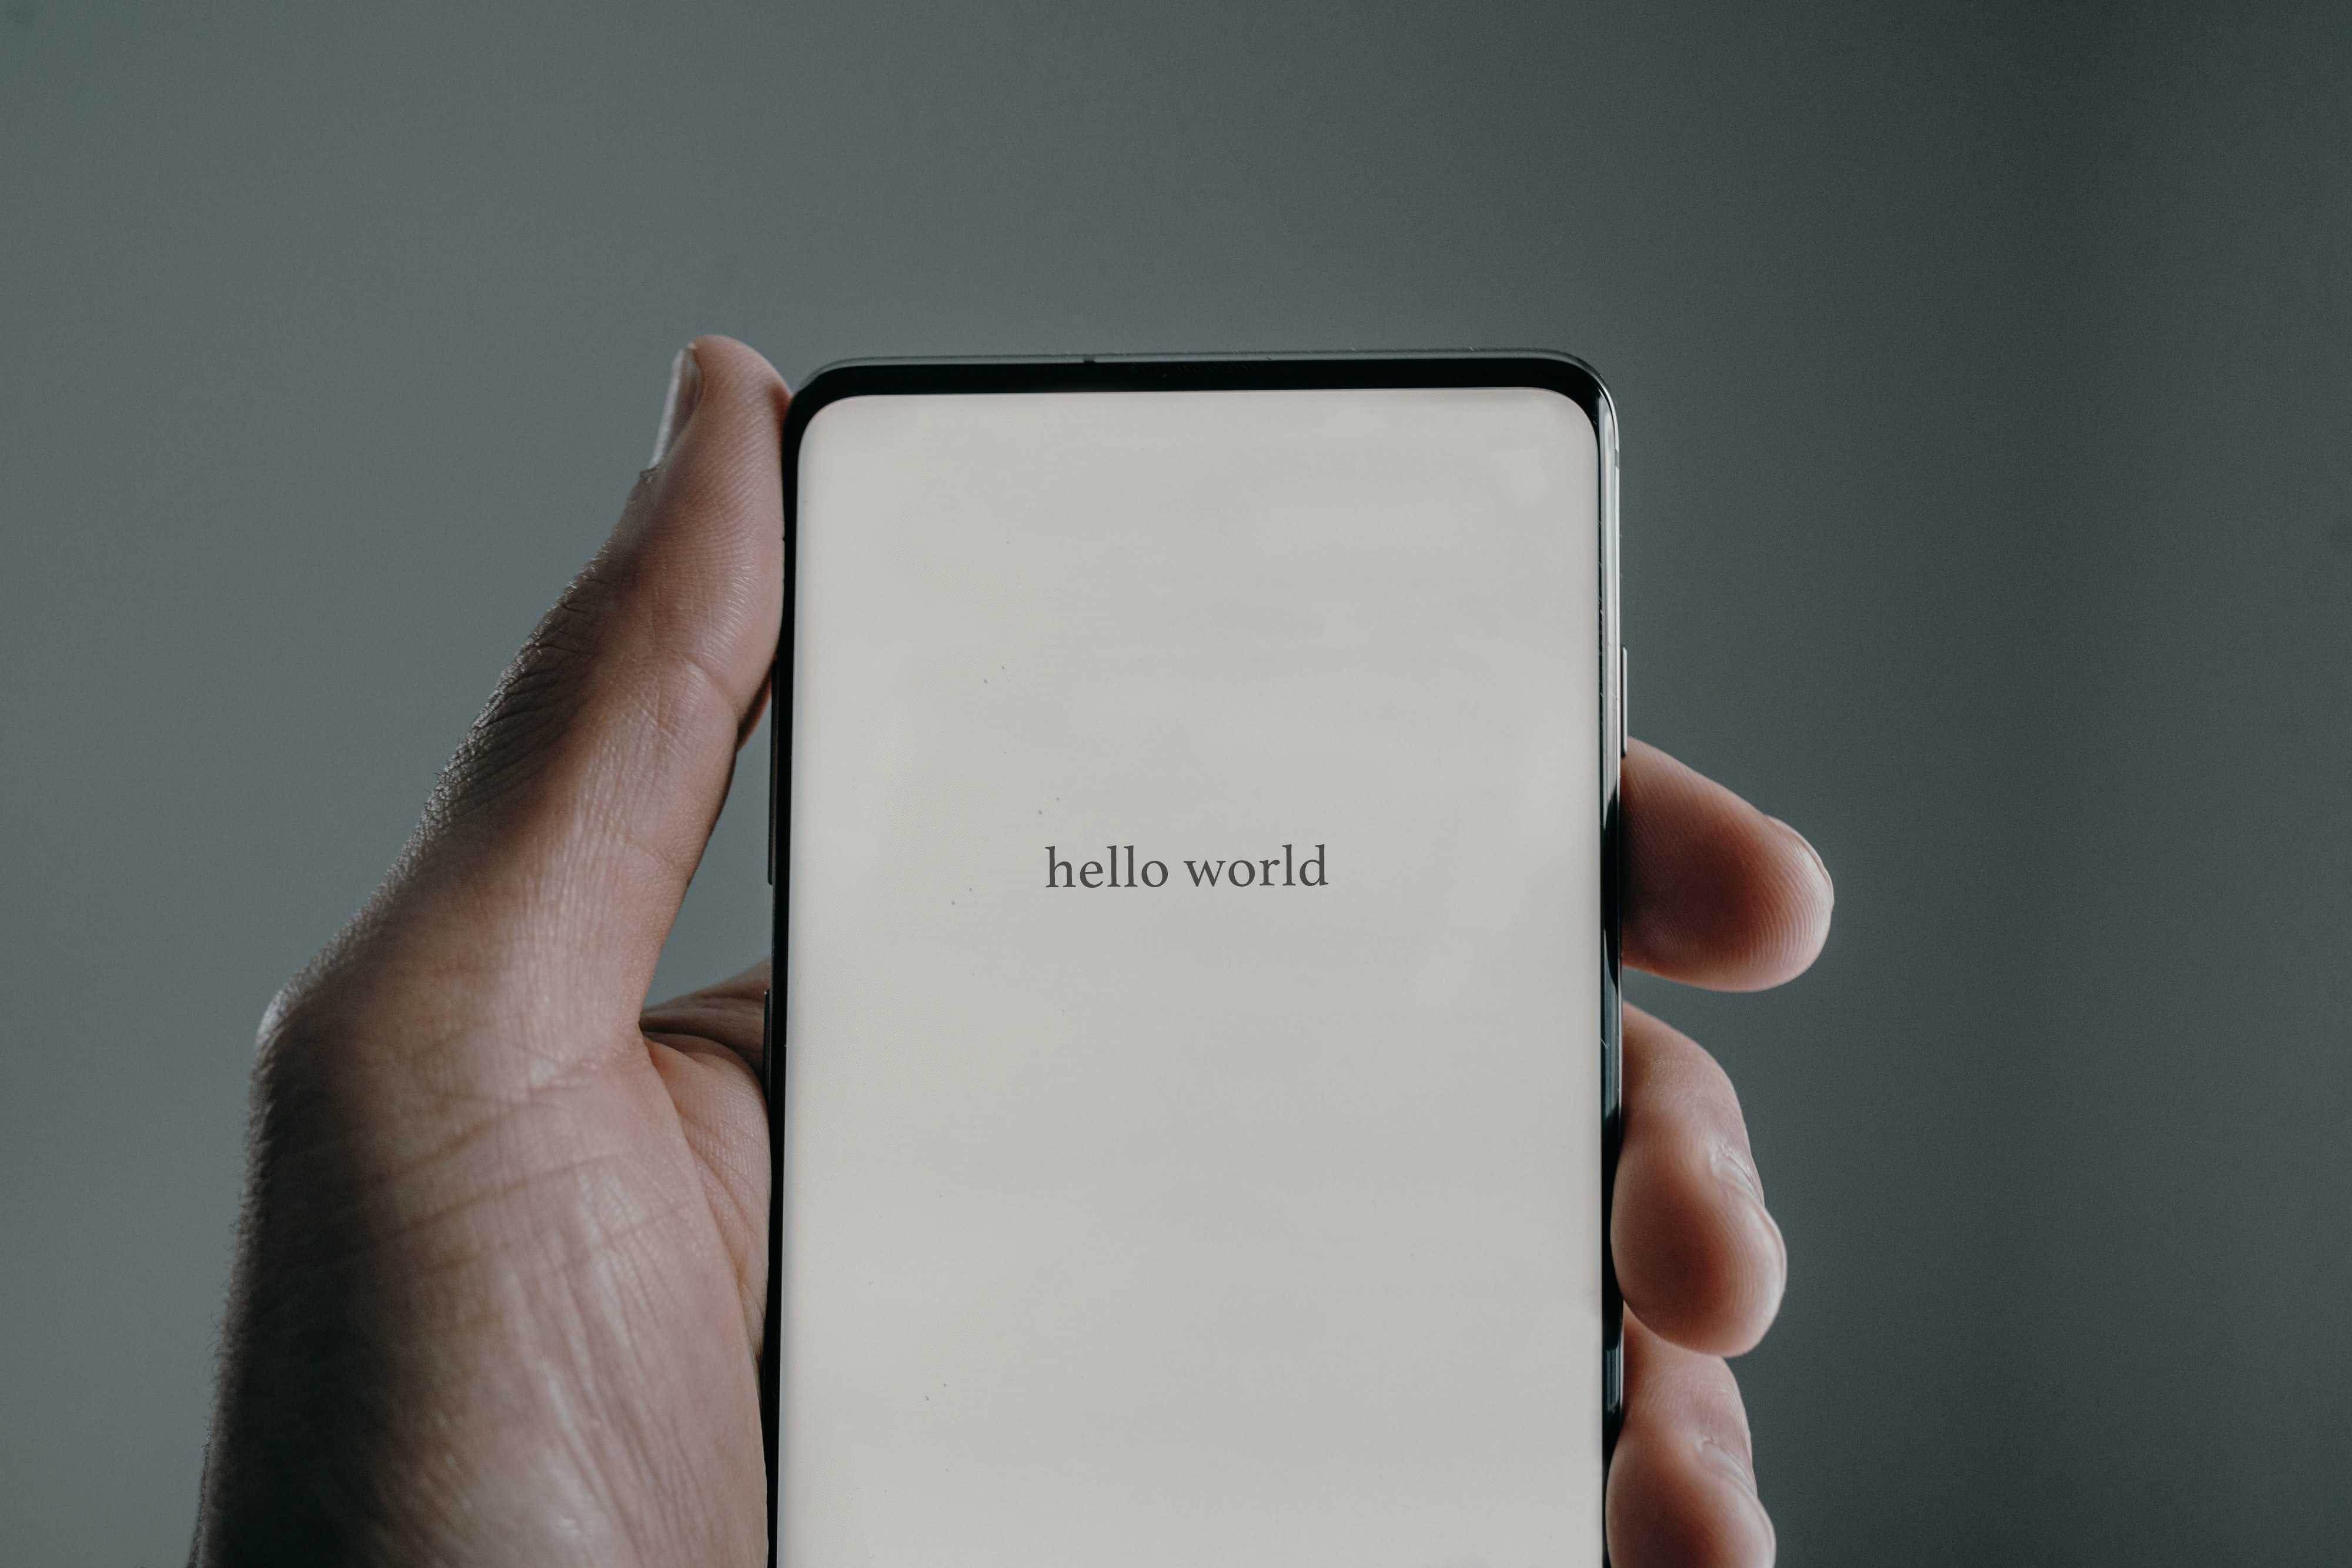 Hello World by Clay Banks from unsplash